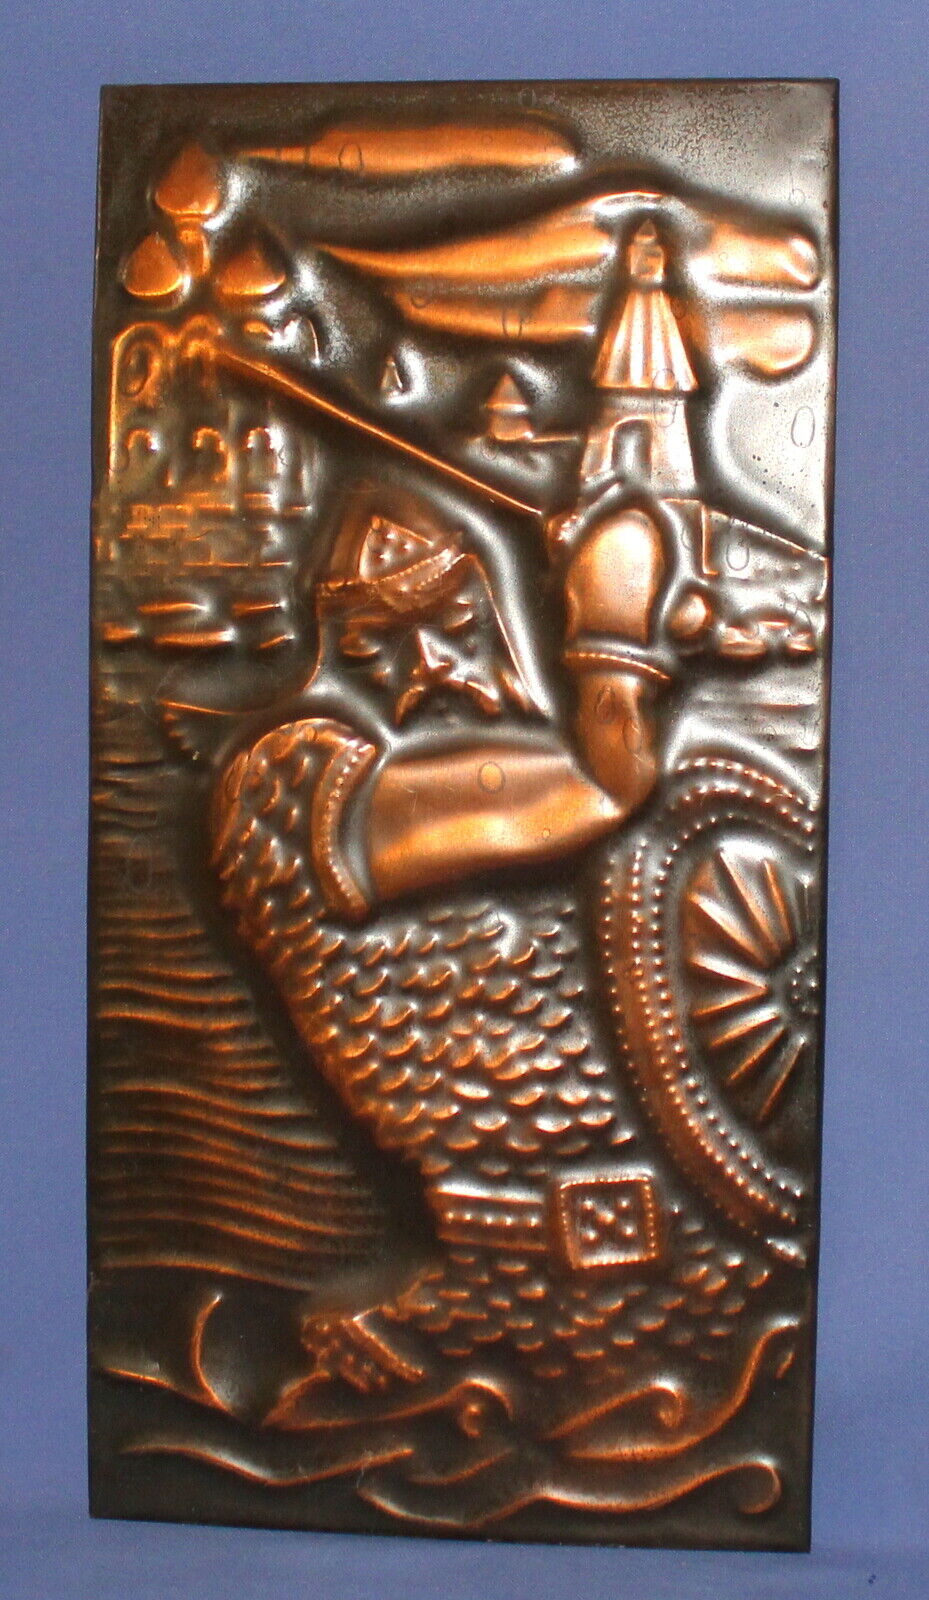 1979 USSR Russian handmade copper decorative wall hanging plaque knight